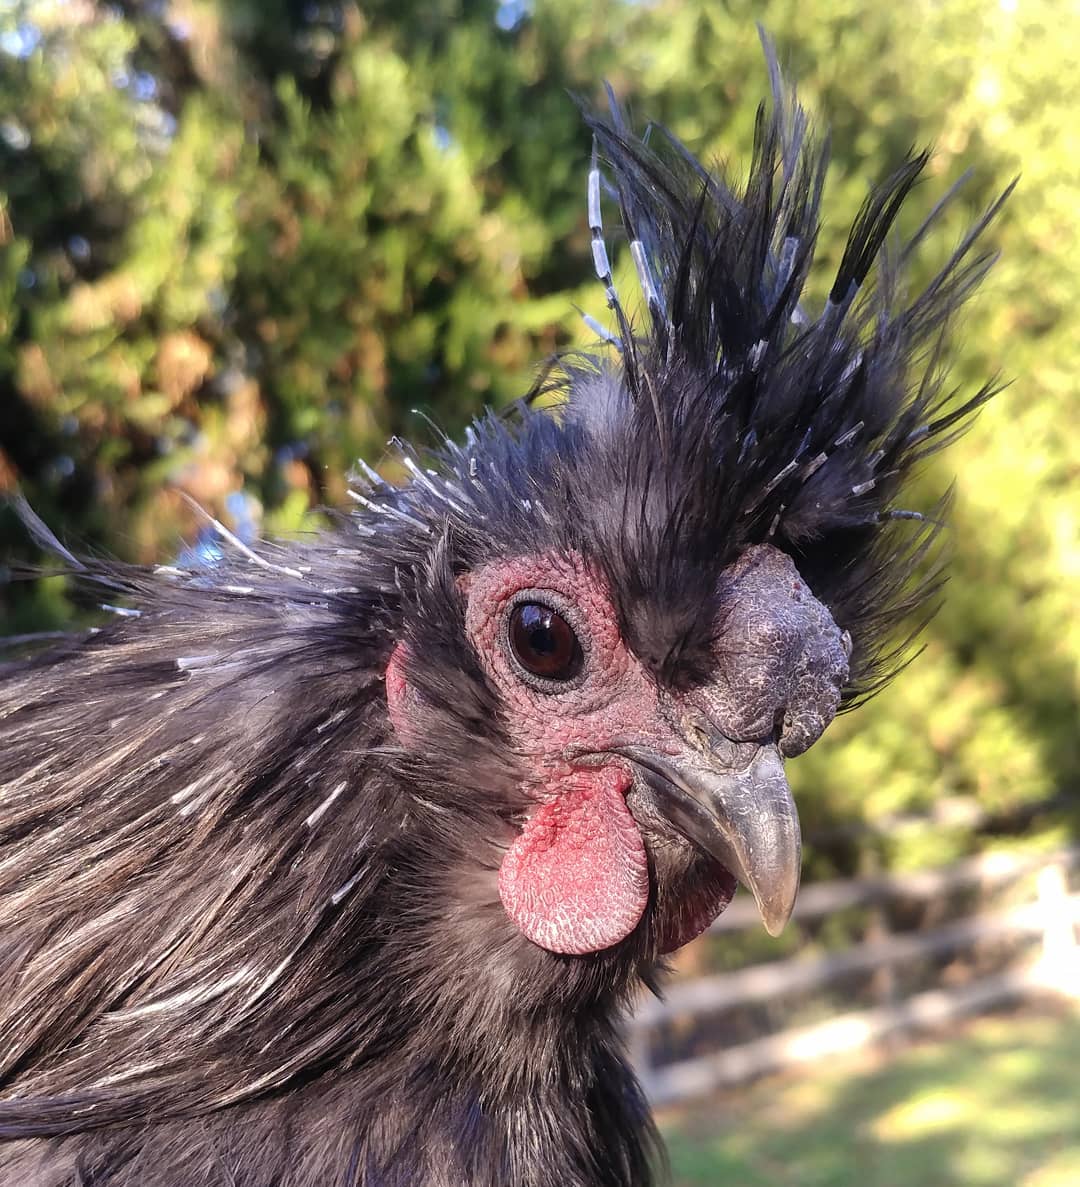 Sonia is working on his mohawk. As a tiny silkie rooster with a girly name, every bit of toughness is important. He did not appreciate my help in removing feather casings. Or the snuggles I offered. Or anything to do with me. Roosters.